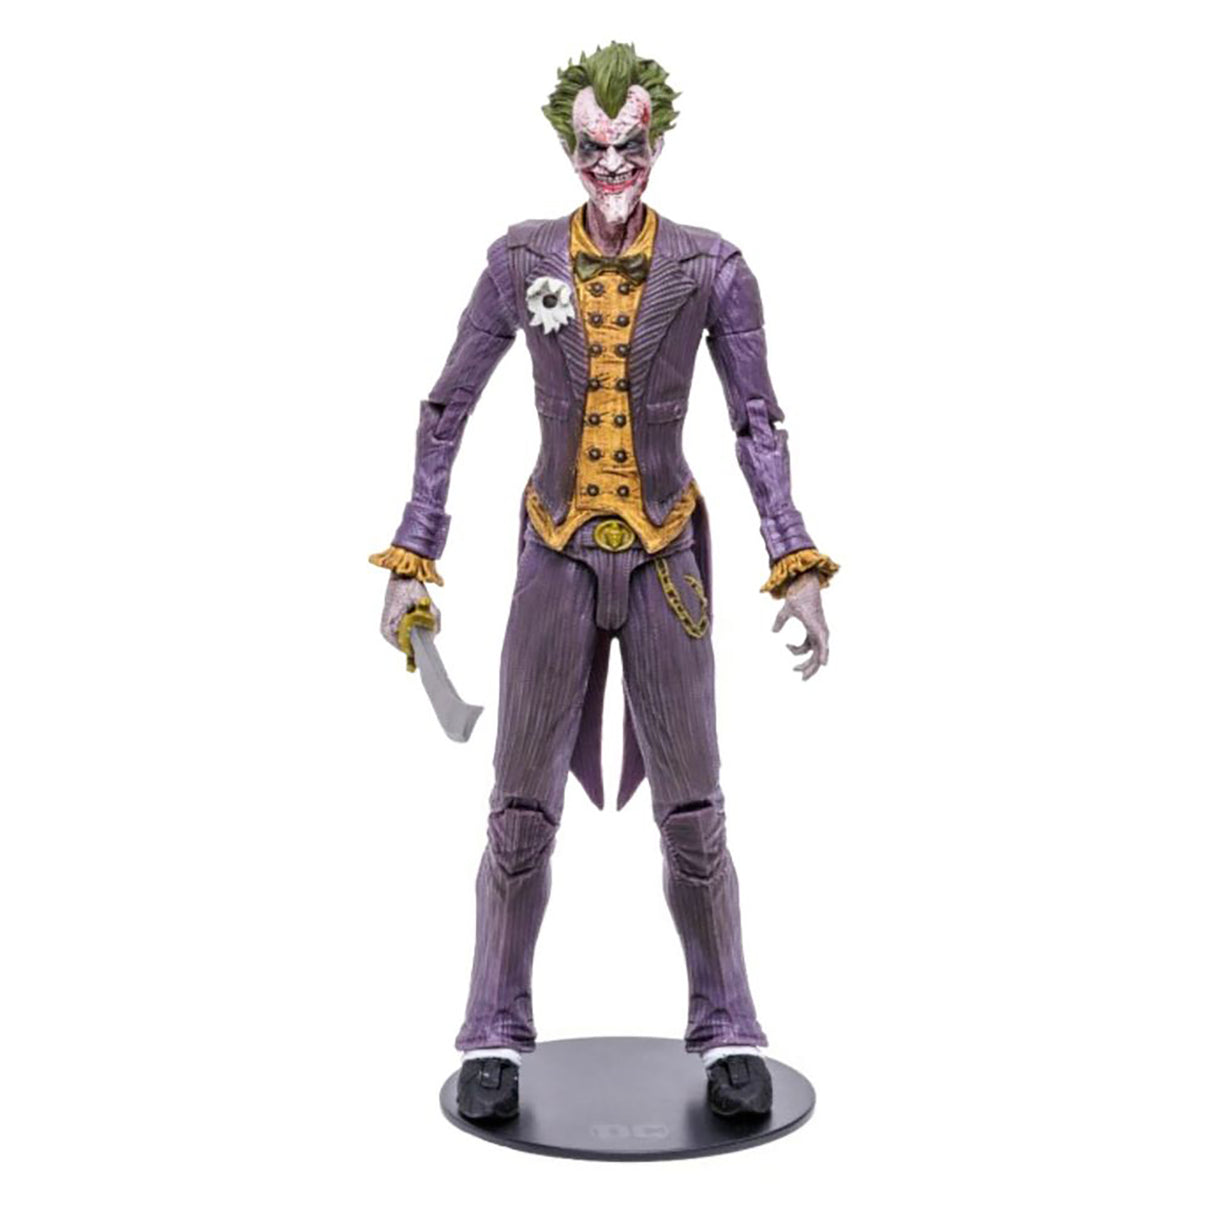 McFarlane Dc Gaming Figures Wv8 The Joker (Infected) - Arkham Knight (7 inches)